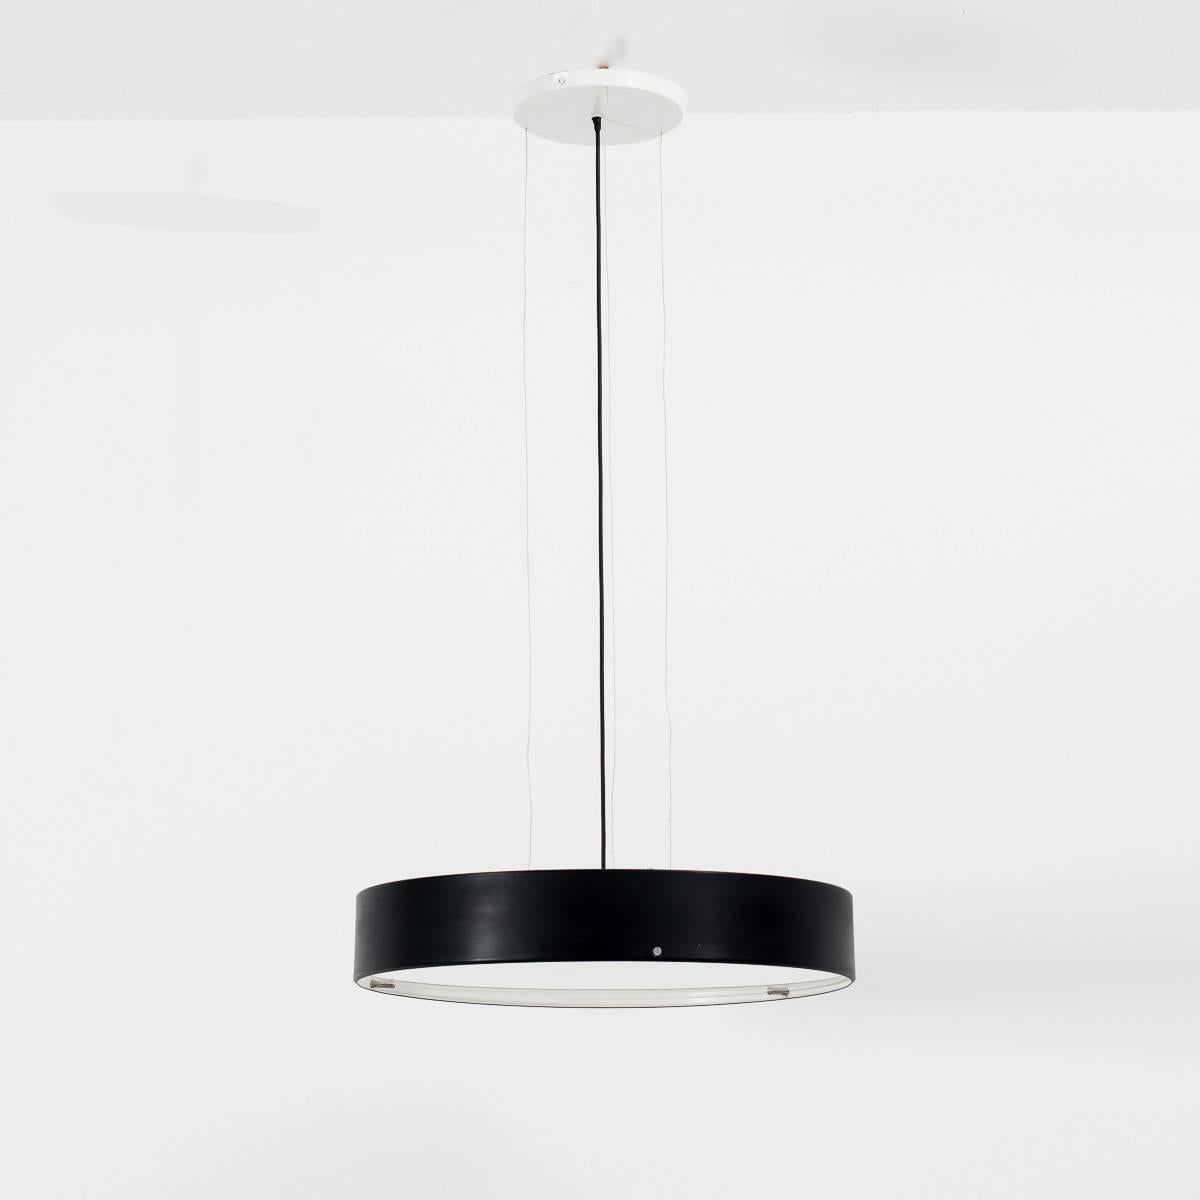 Nice large ceiling fixture model 288 designed by Bruno Gatta for Stilnovo, Italy, 1950s. This lamp has a black lacquered metal shade with milk glass opaline glass diffuser shade, which is held by elegant nickel fittings. White ceiling plate.